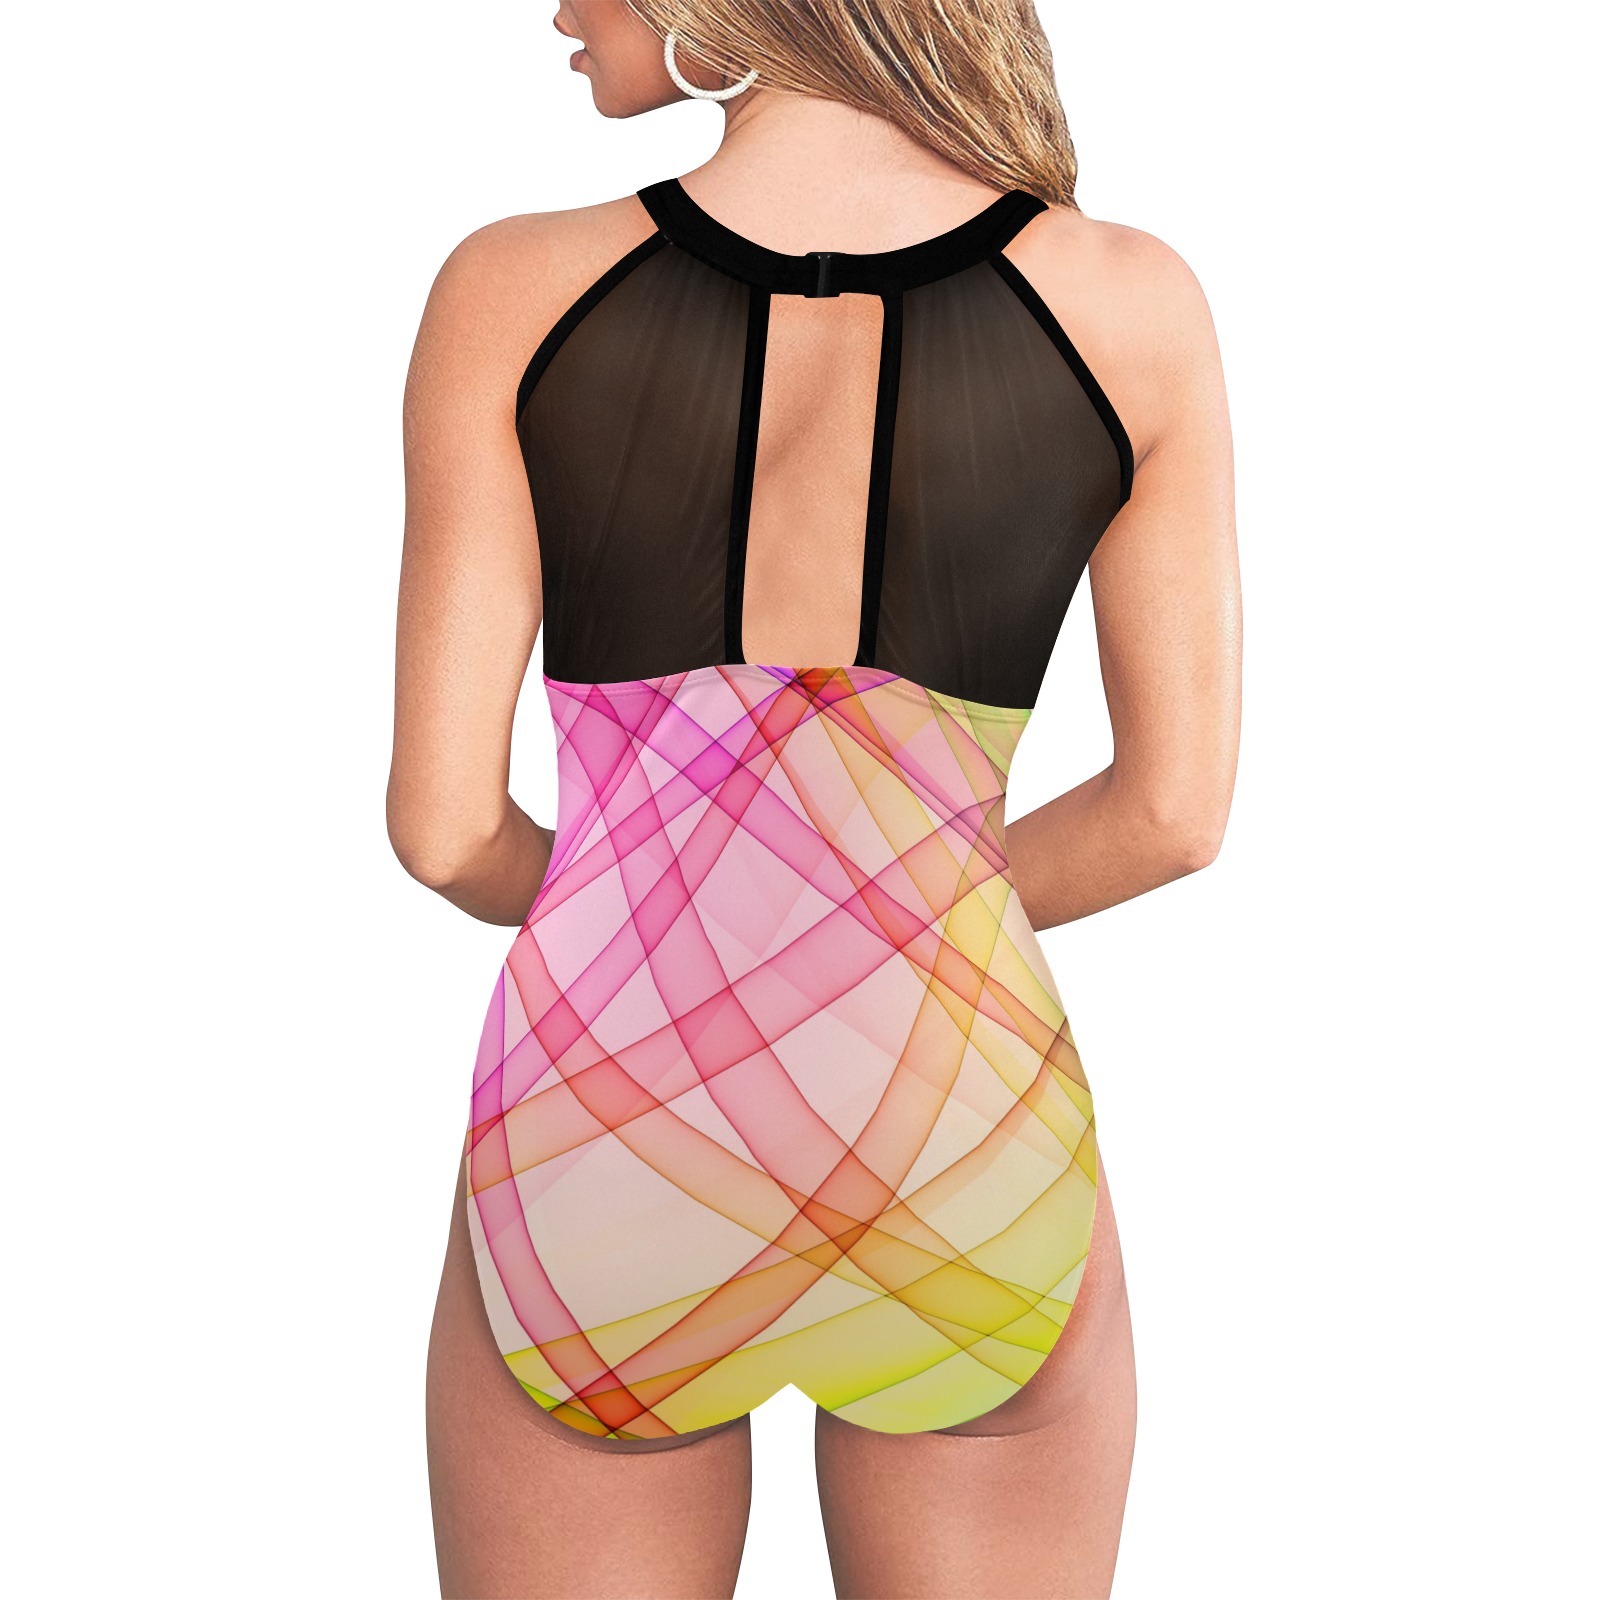 Colorful Geometric Pattern Women's High Neck Plunge Mesh Ruched Swimsuit (S43)